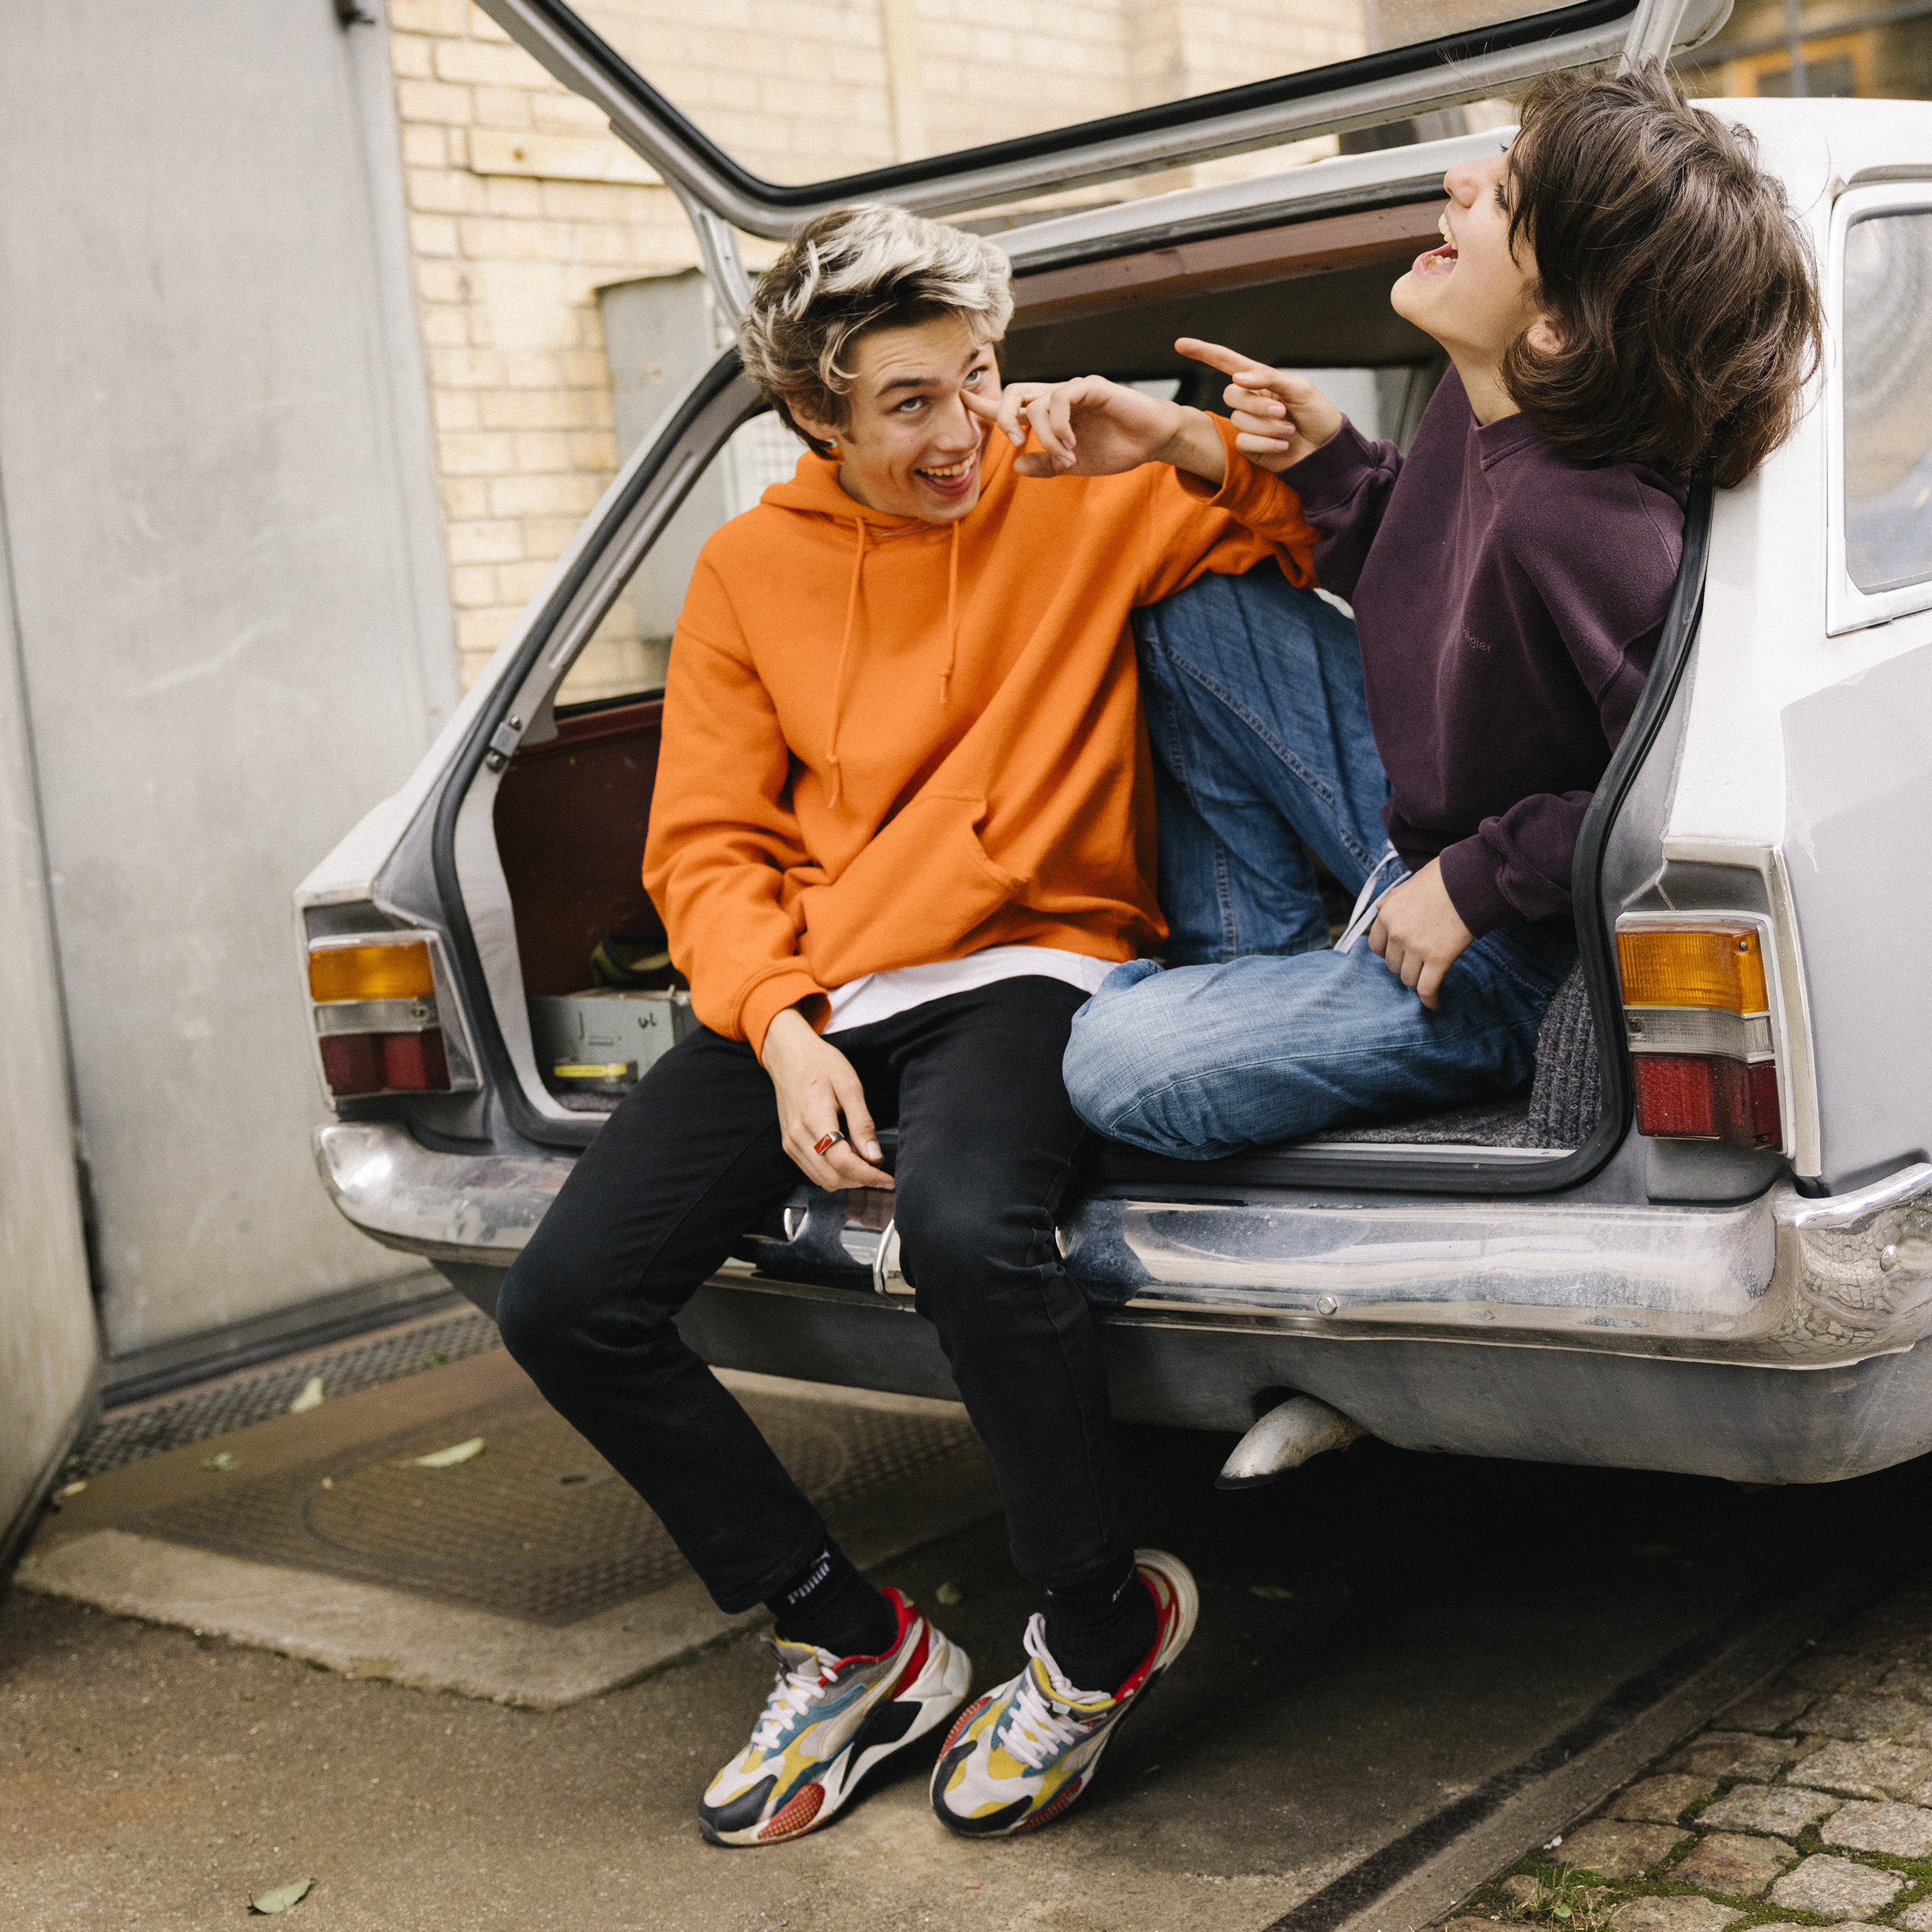 Two young people sit laughing in the open boot of a car.